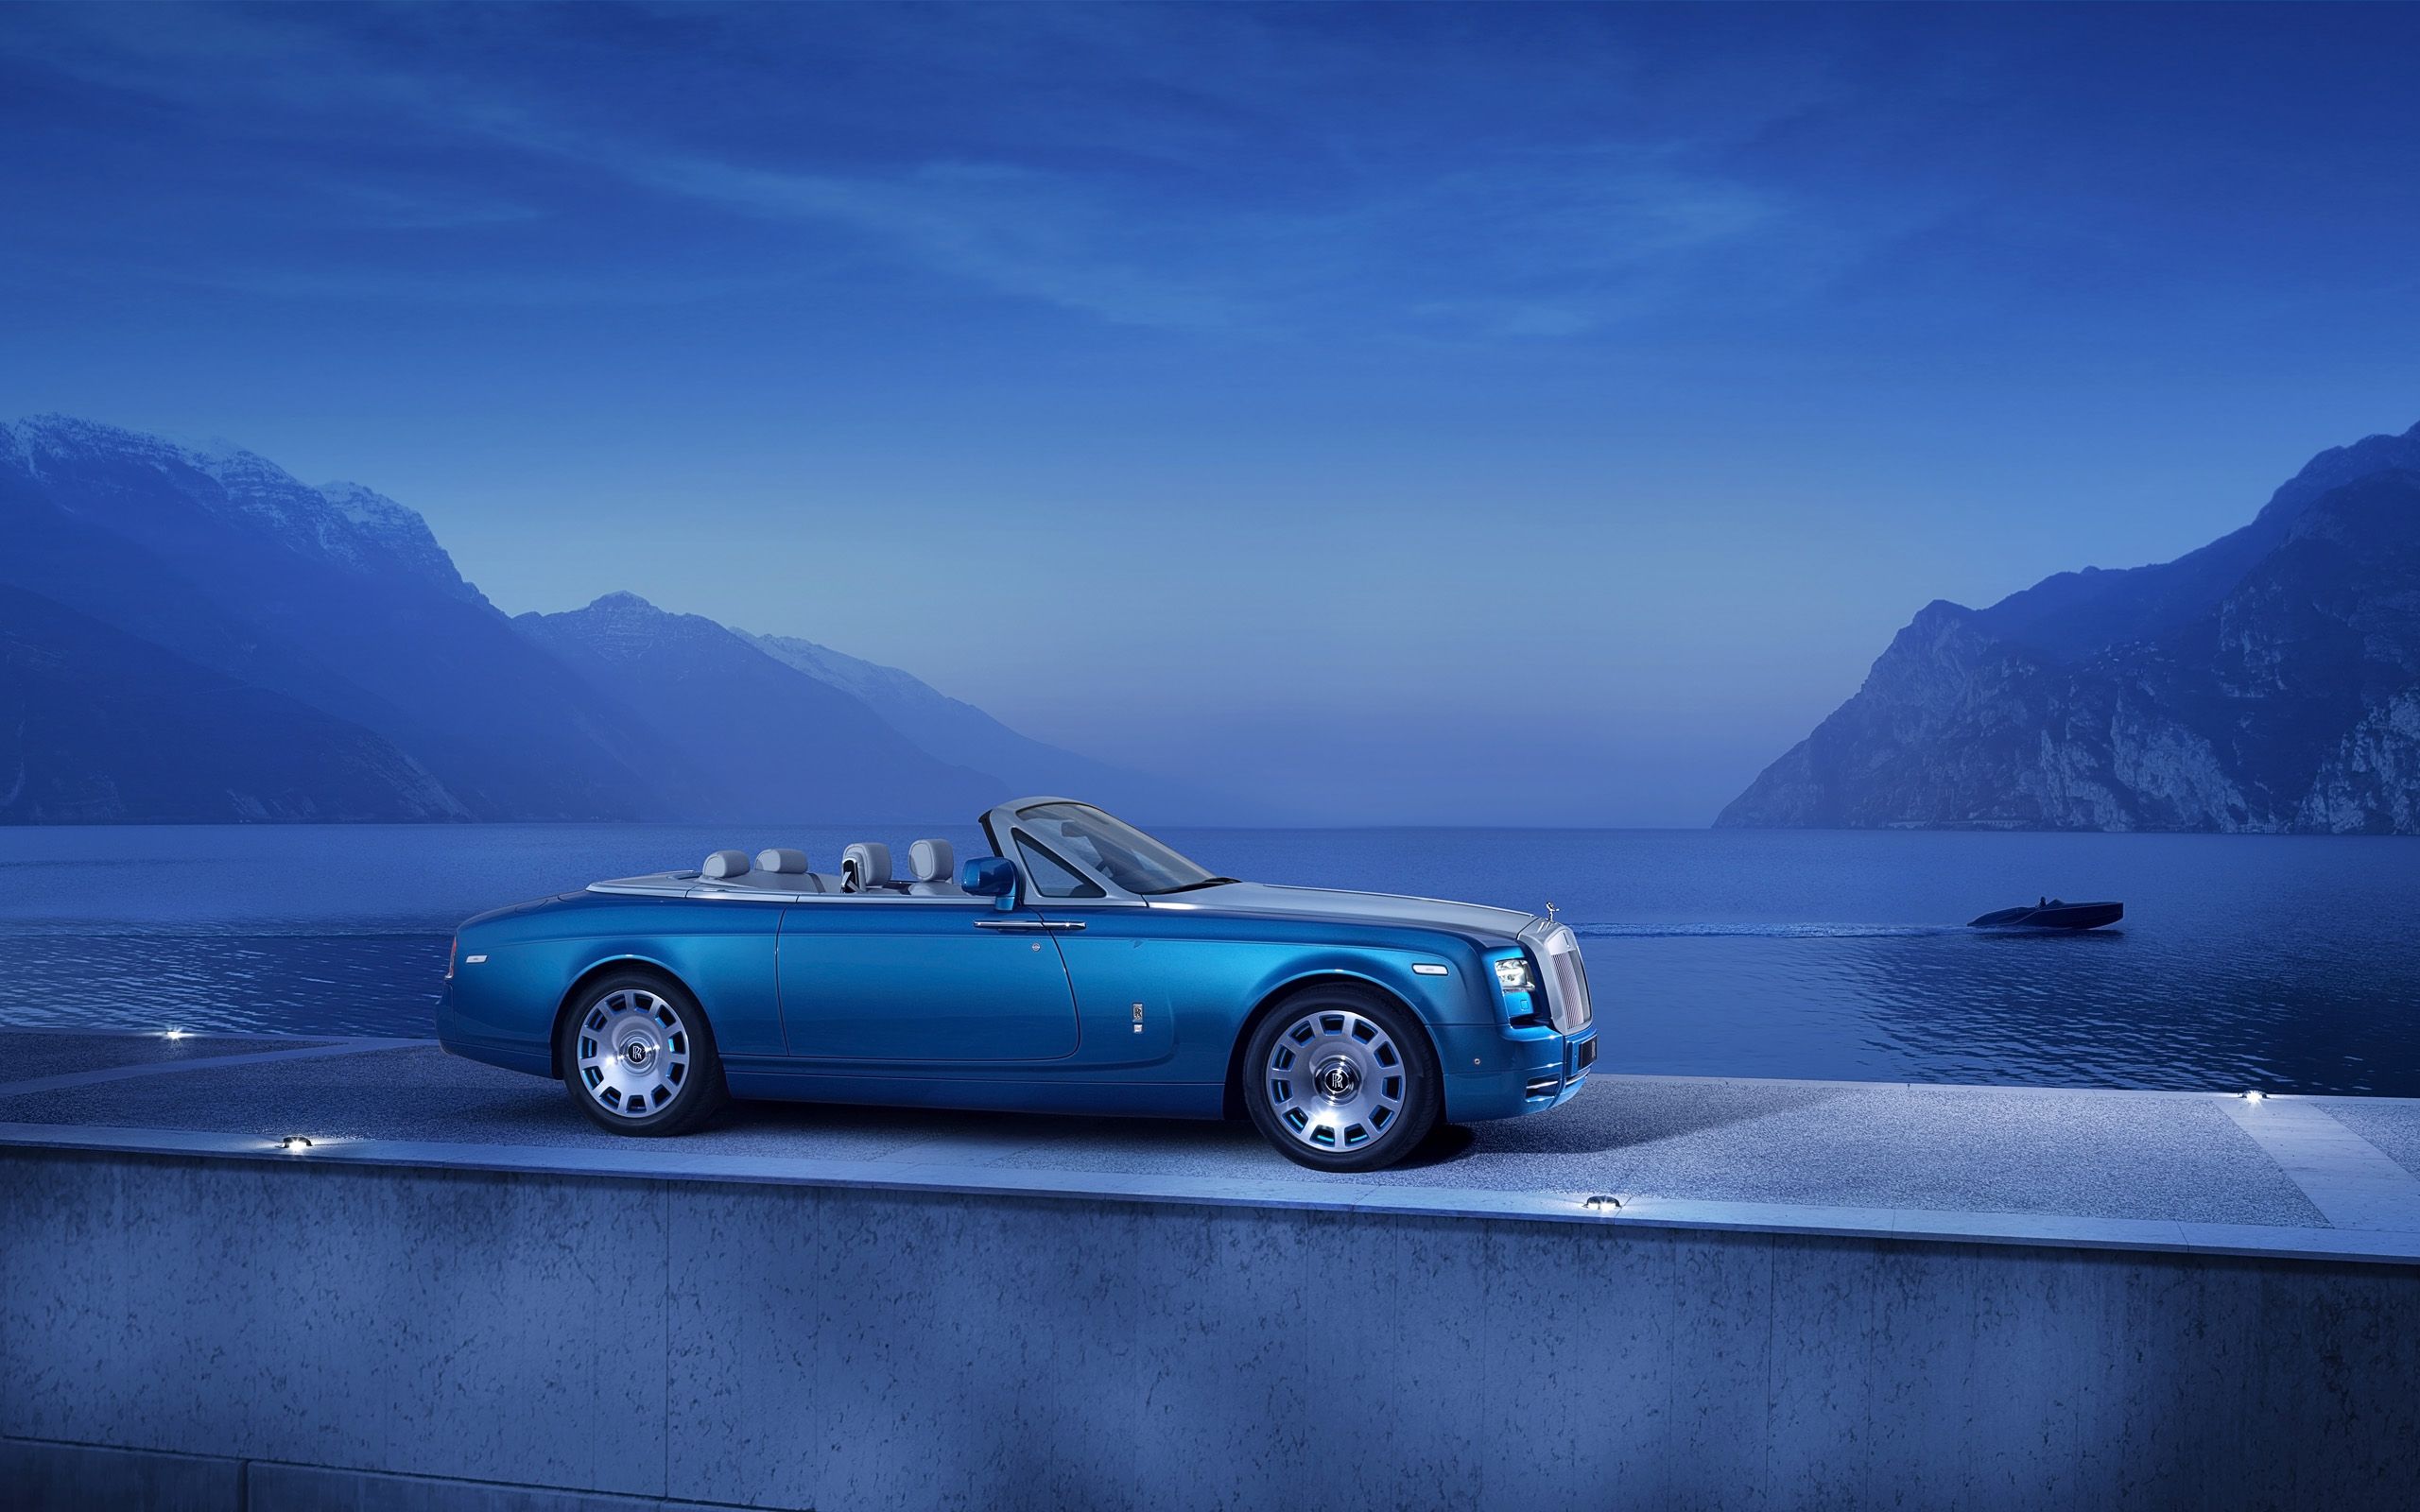 2014 Rolls Royce Phantom Drophead Coupe Waterspeed Collection ...